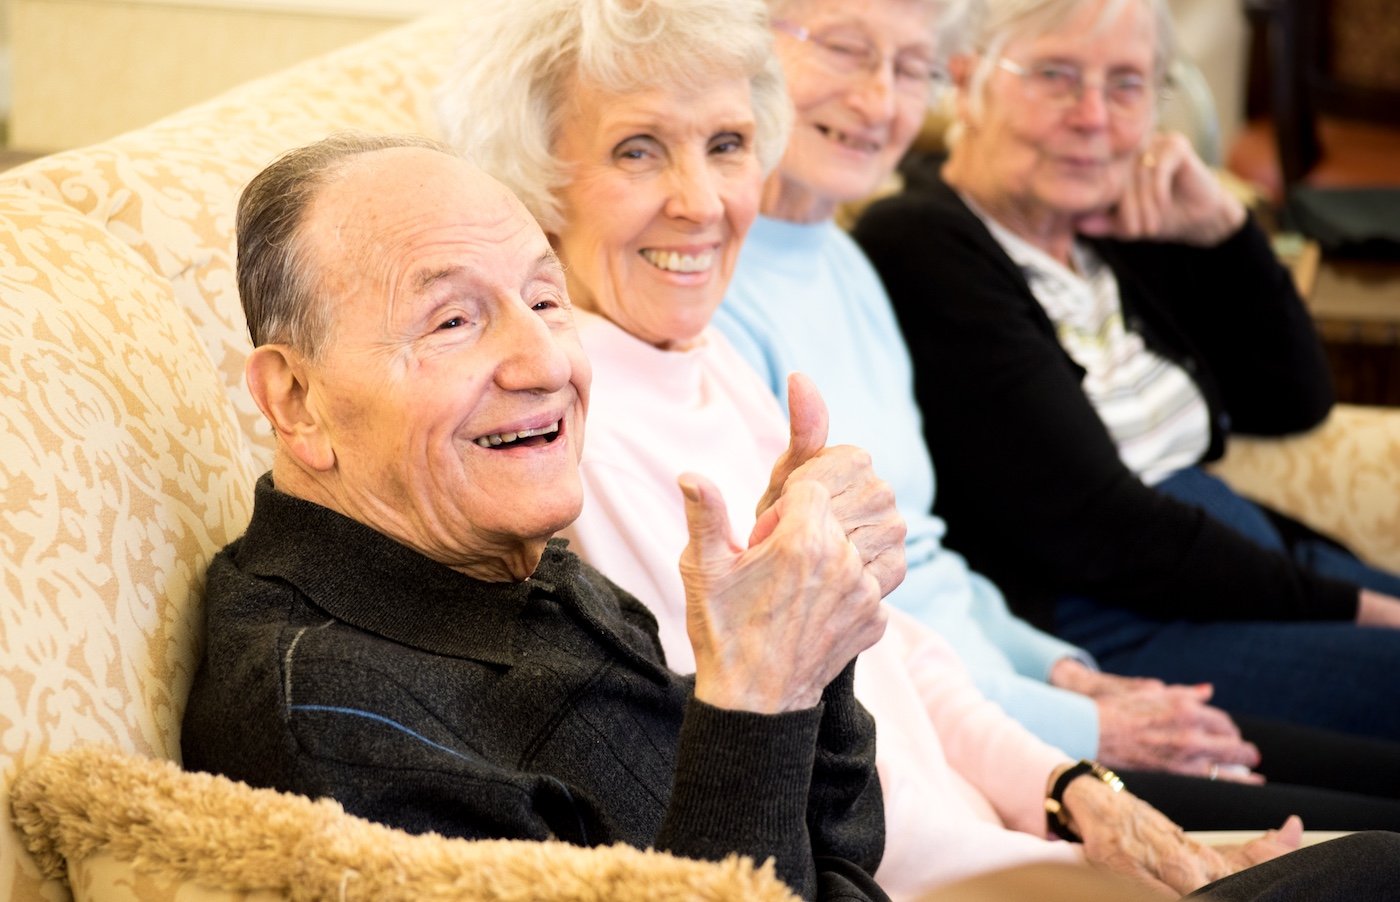 Group of seniors smiling on a couch as a man in front gives thumbs up